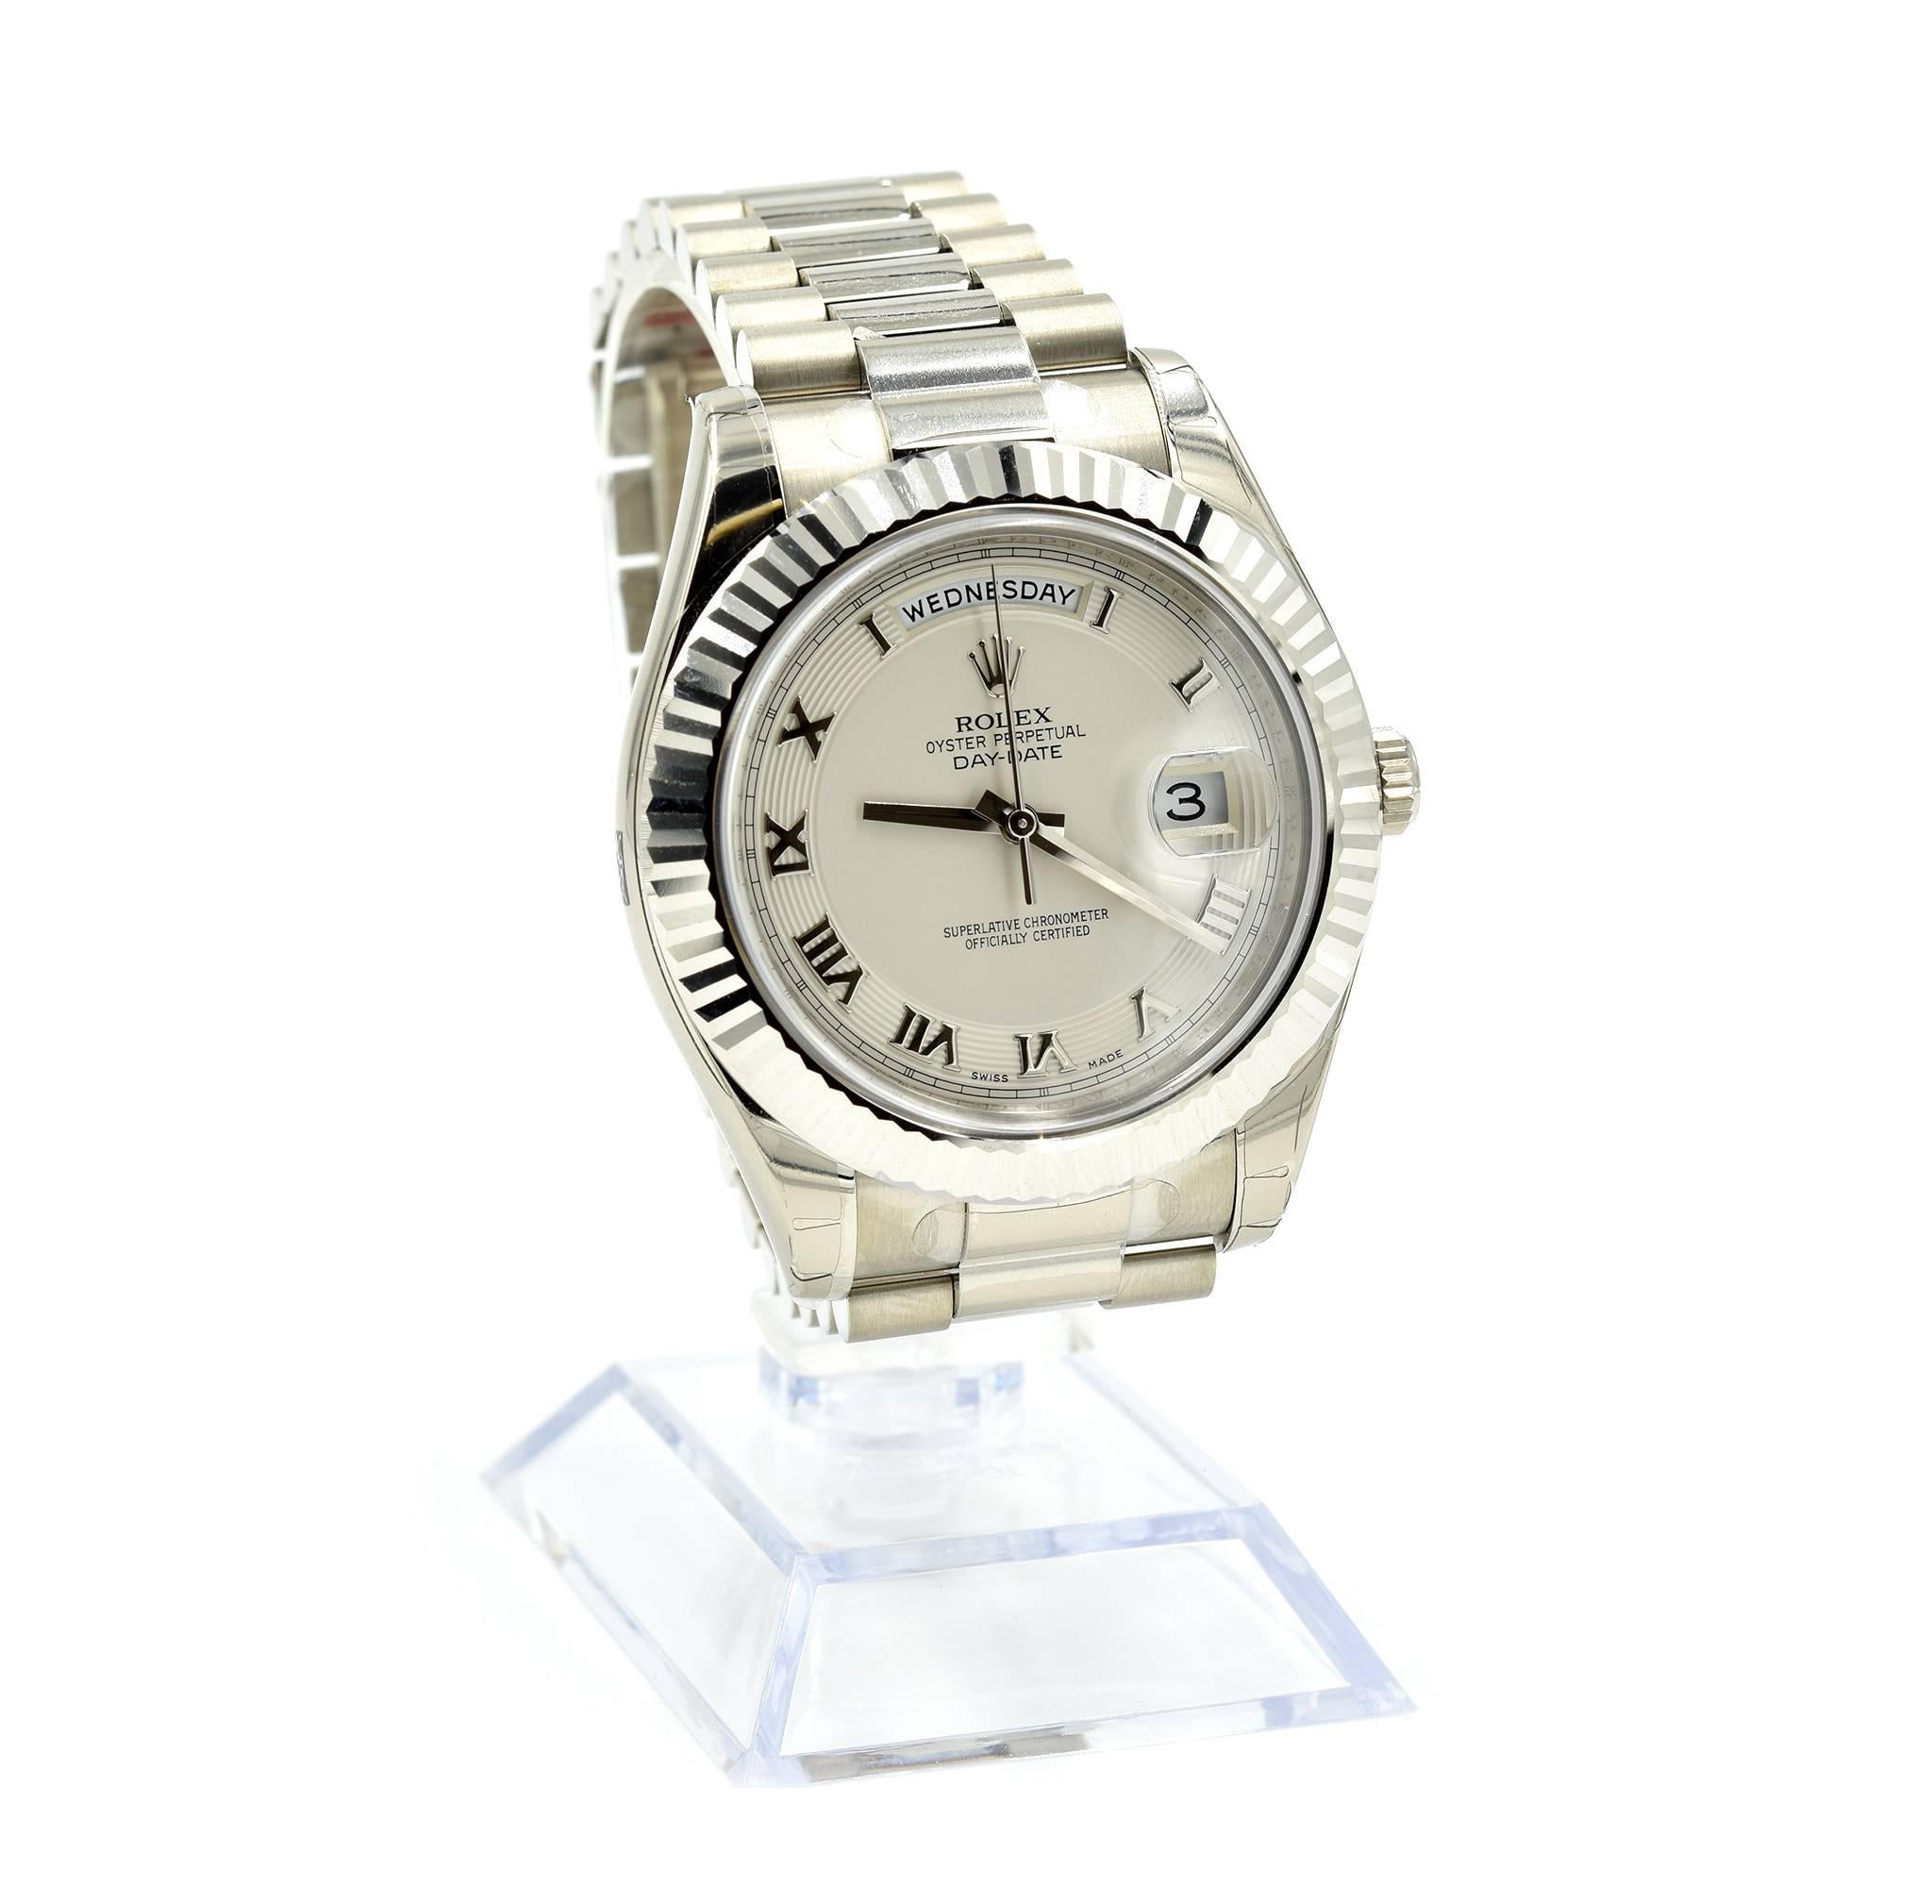 Movement: Swiss made Rolex Caliber 3156 automatic movement
Function: hours, minutes, seconds, day, date
Case: round 41mm 18k white gold case, 18k white gold fluted bezel, sapphire protective crystal, screw down crown, water resistant to 100